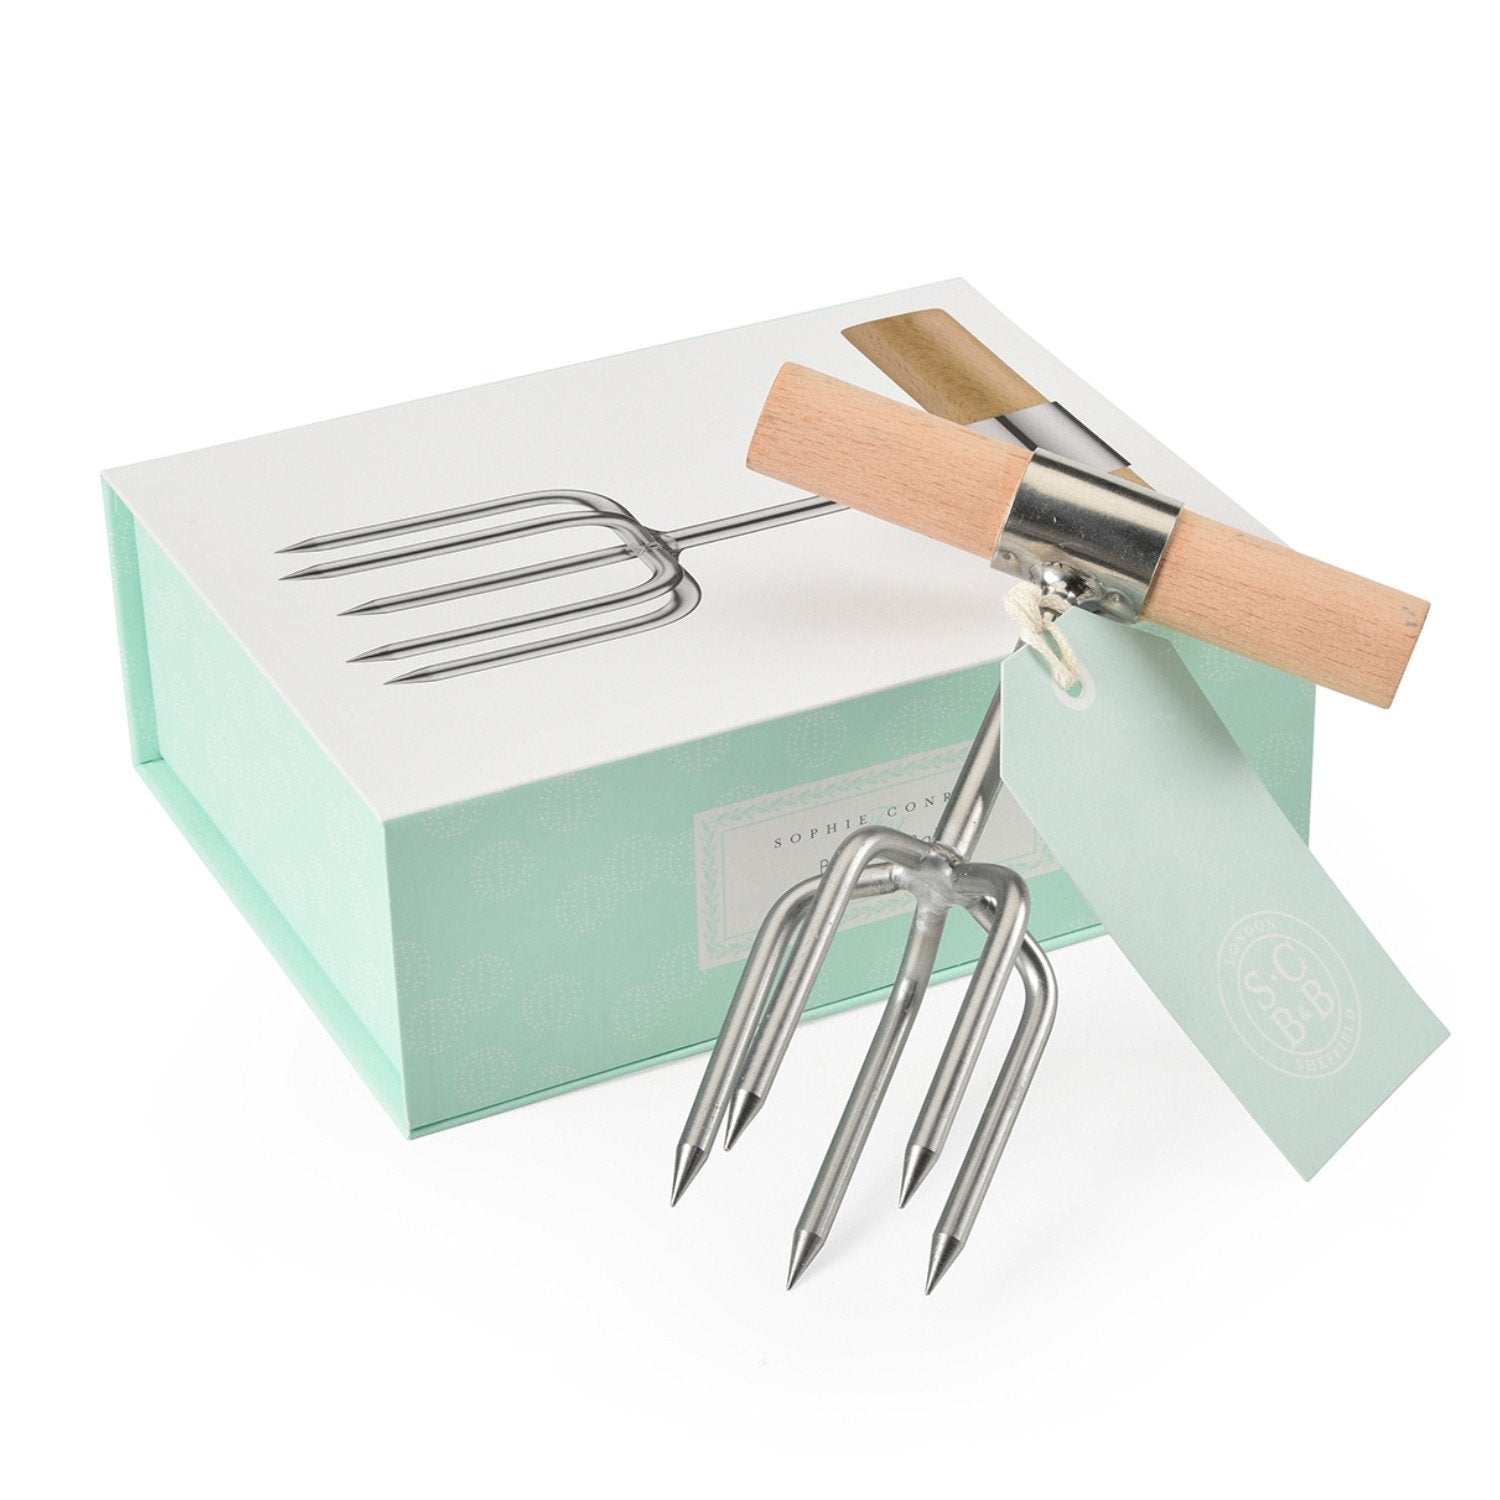 SOPHIE CONRAN | Twist Claw Cultivator outside Gift Box